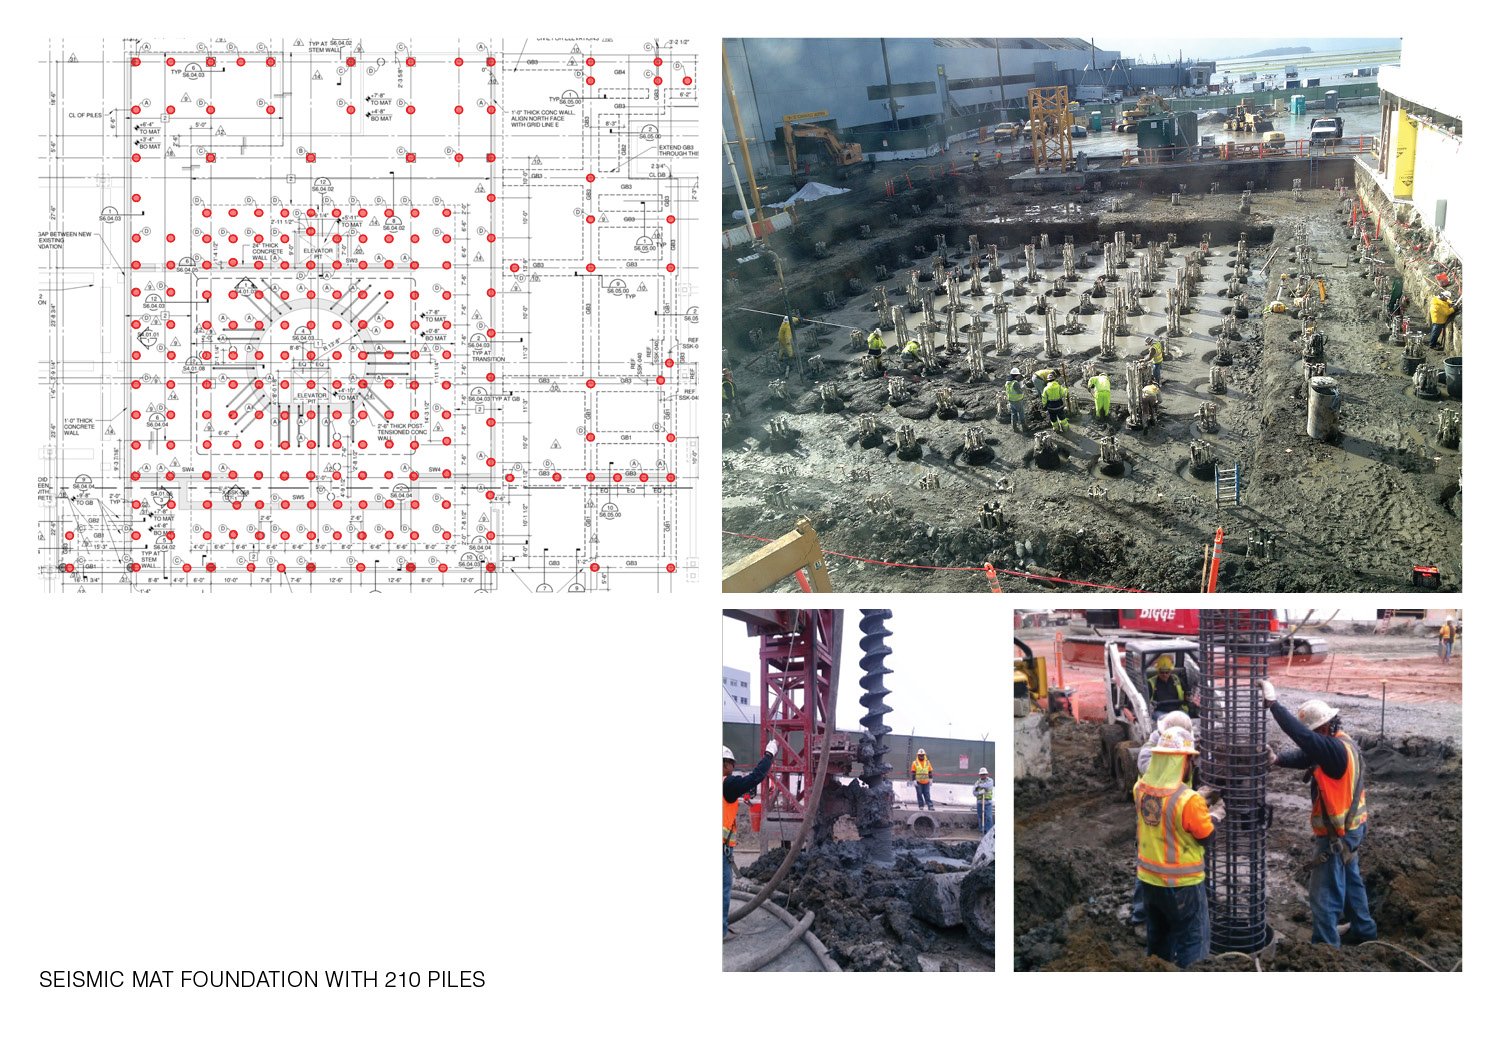 Seismic Mat Foundation with 210 Piles | Fentress Architects